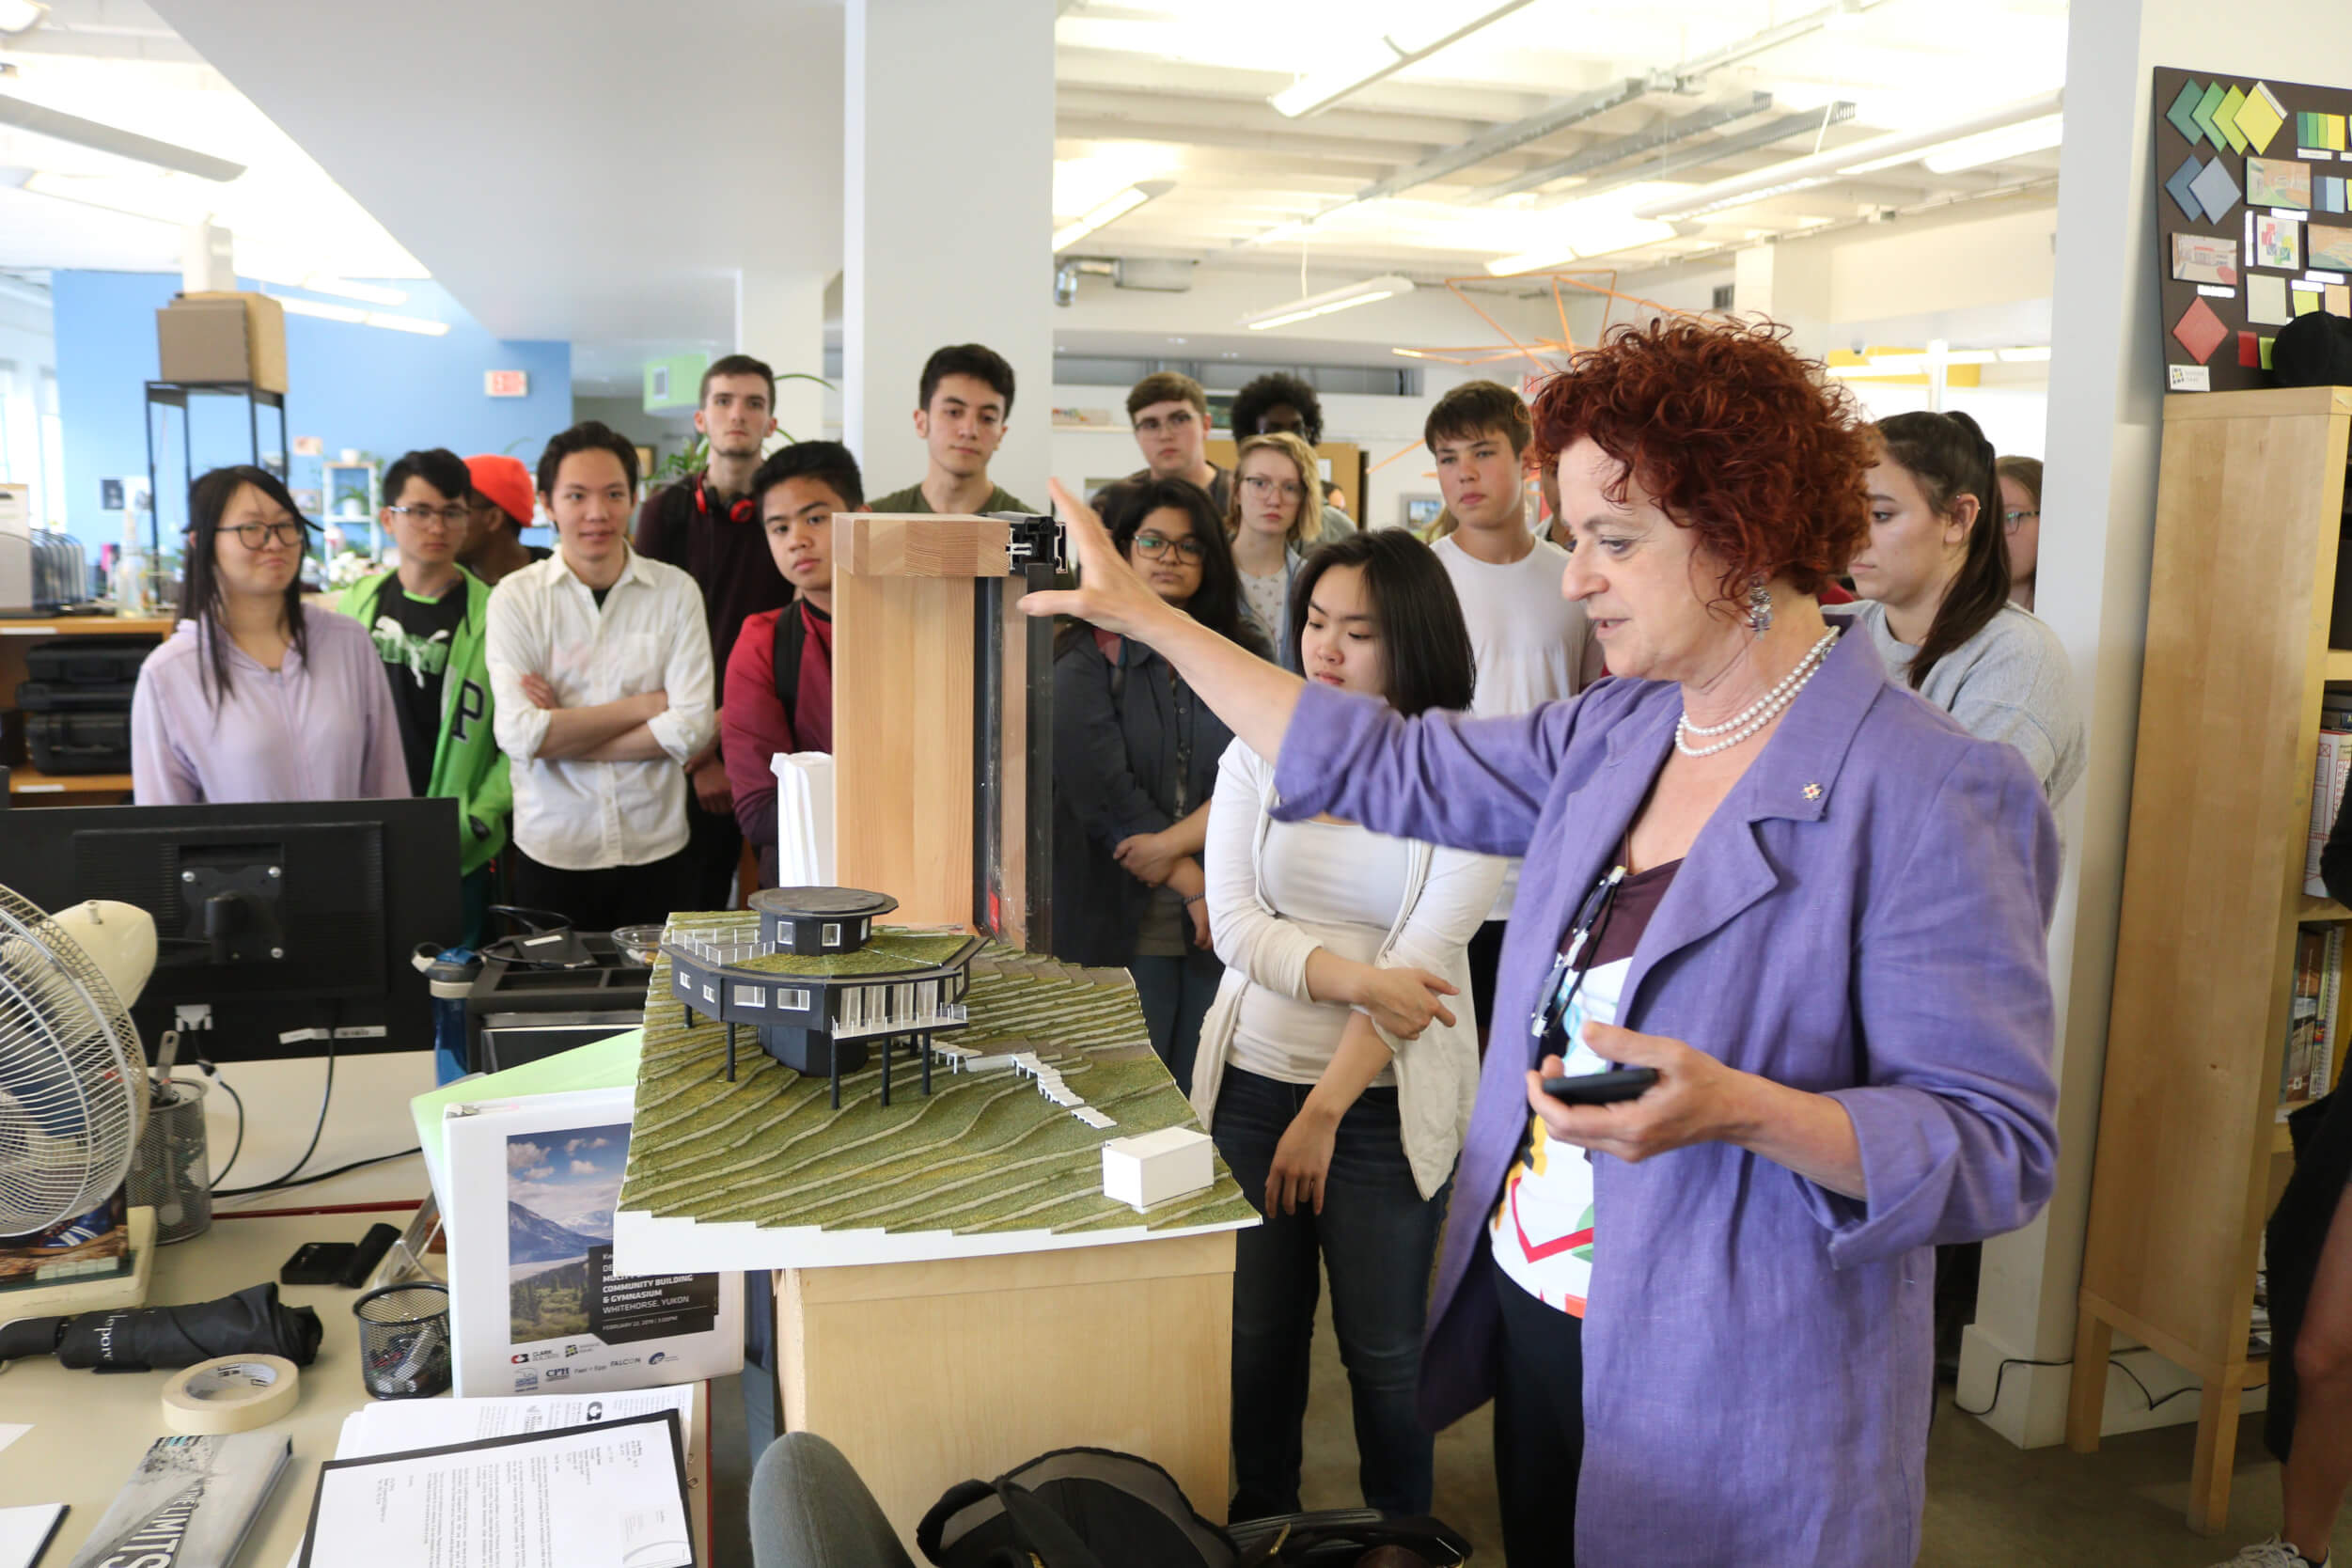 Vivian Manasc, Principal with architecture firm Manasc Isaac and chair of AU's Board of Governors, gave students a tour of her downtown studio.